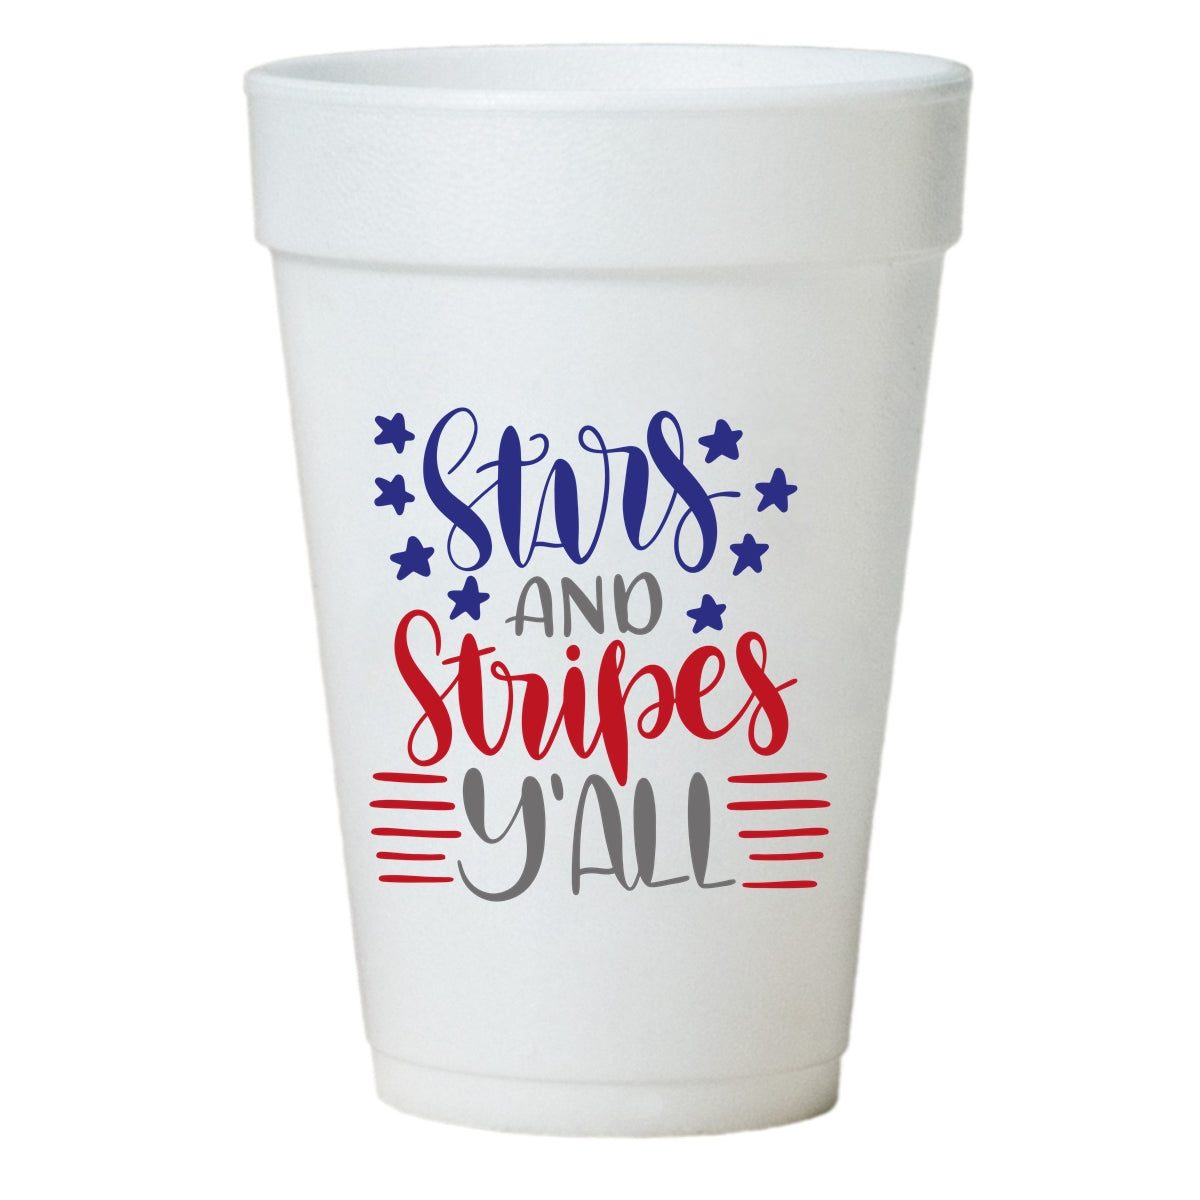 Stars and Stripes Y'all Patiotic 4th of July Styrofoam Cups